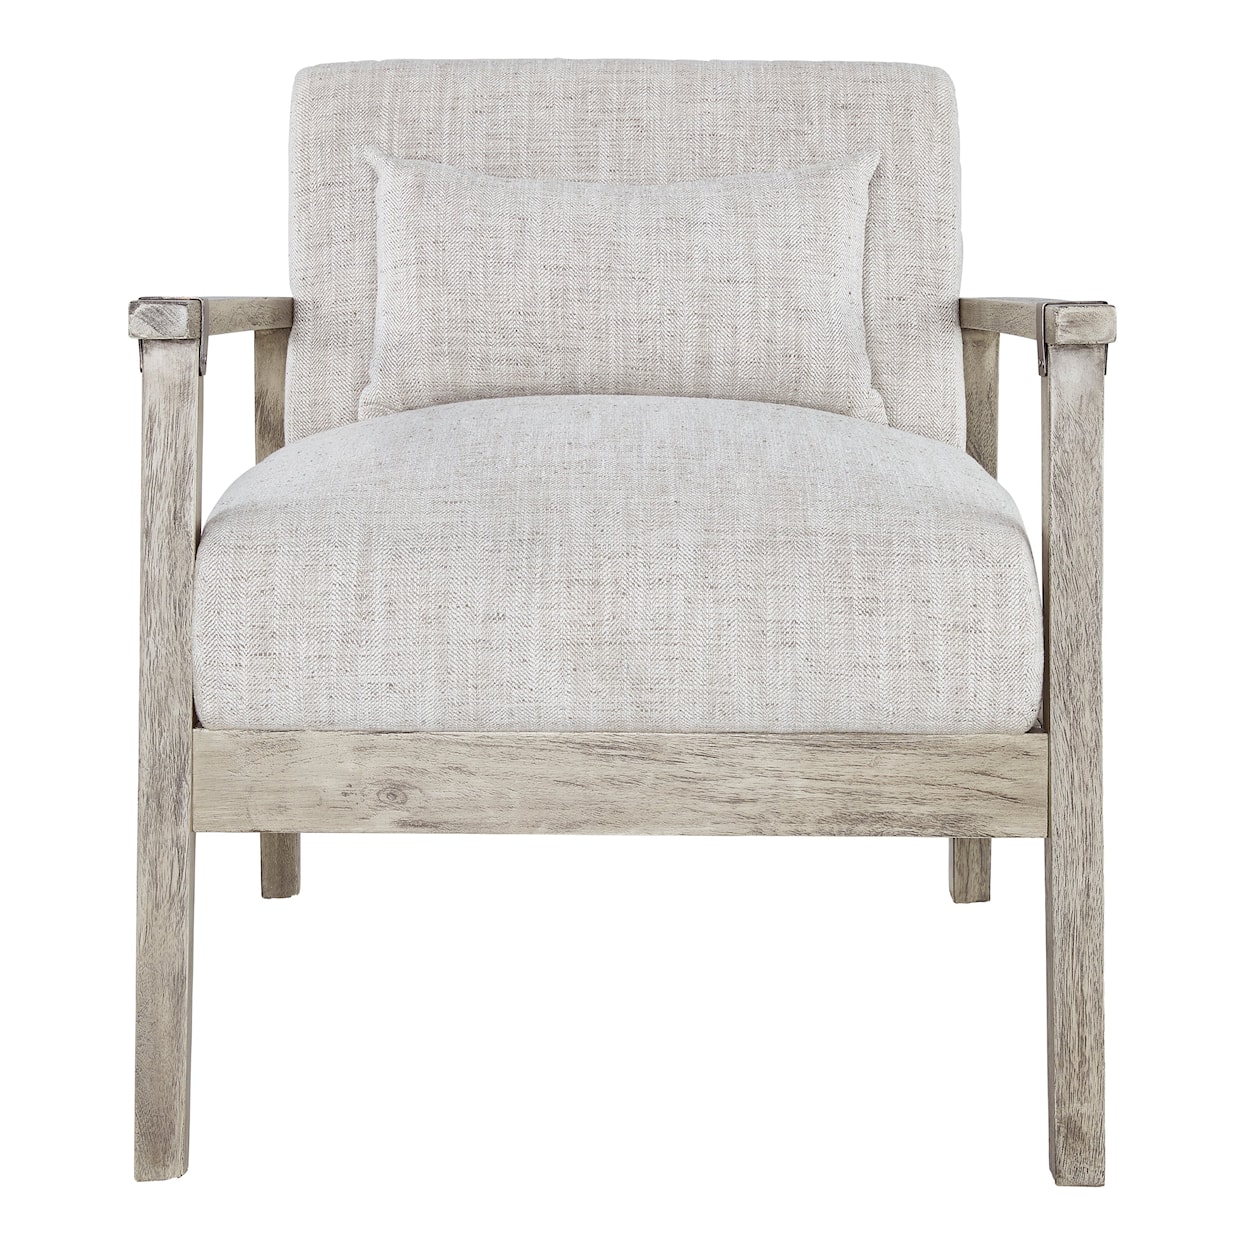 Signature Design by Ashley Dalenville Accent Chair